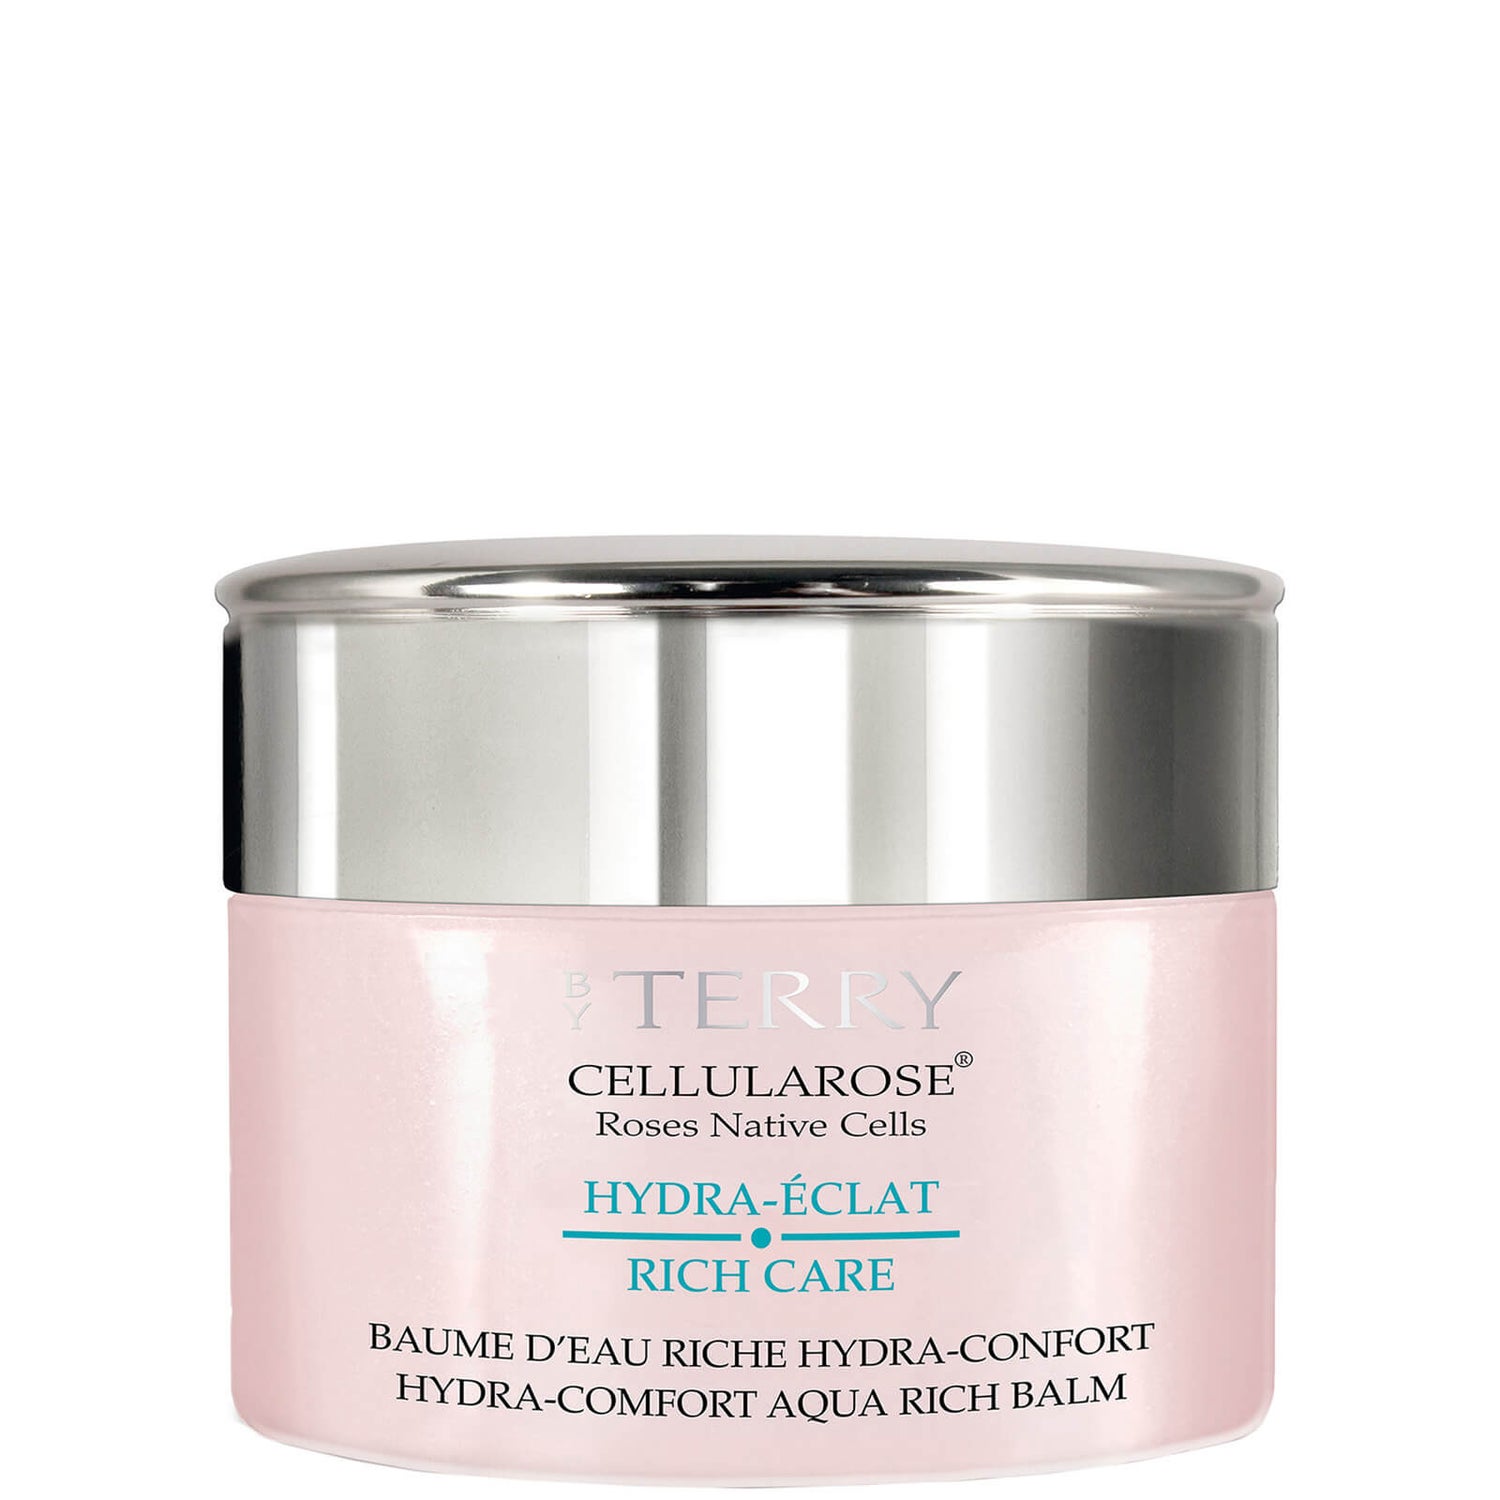 By Terry Cellularose Hydra-Eclat Rich Care Balm 30 g